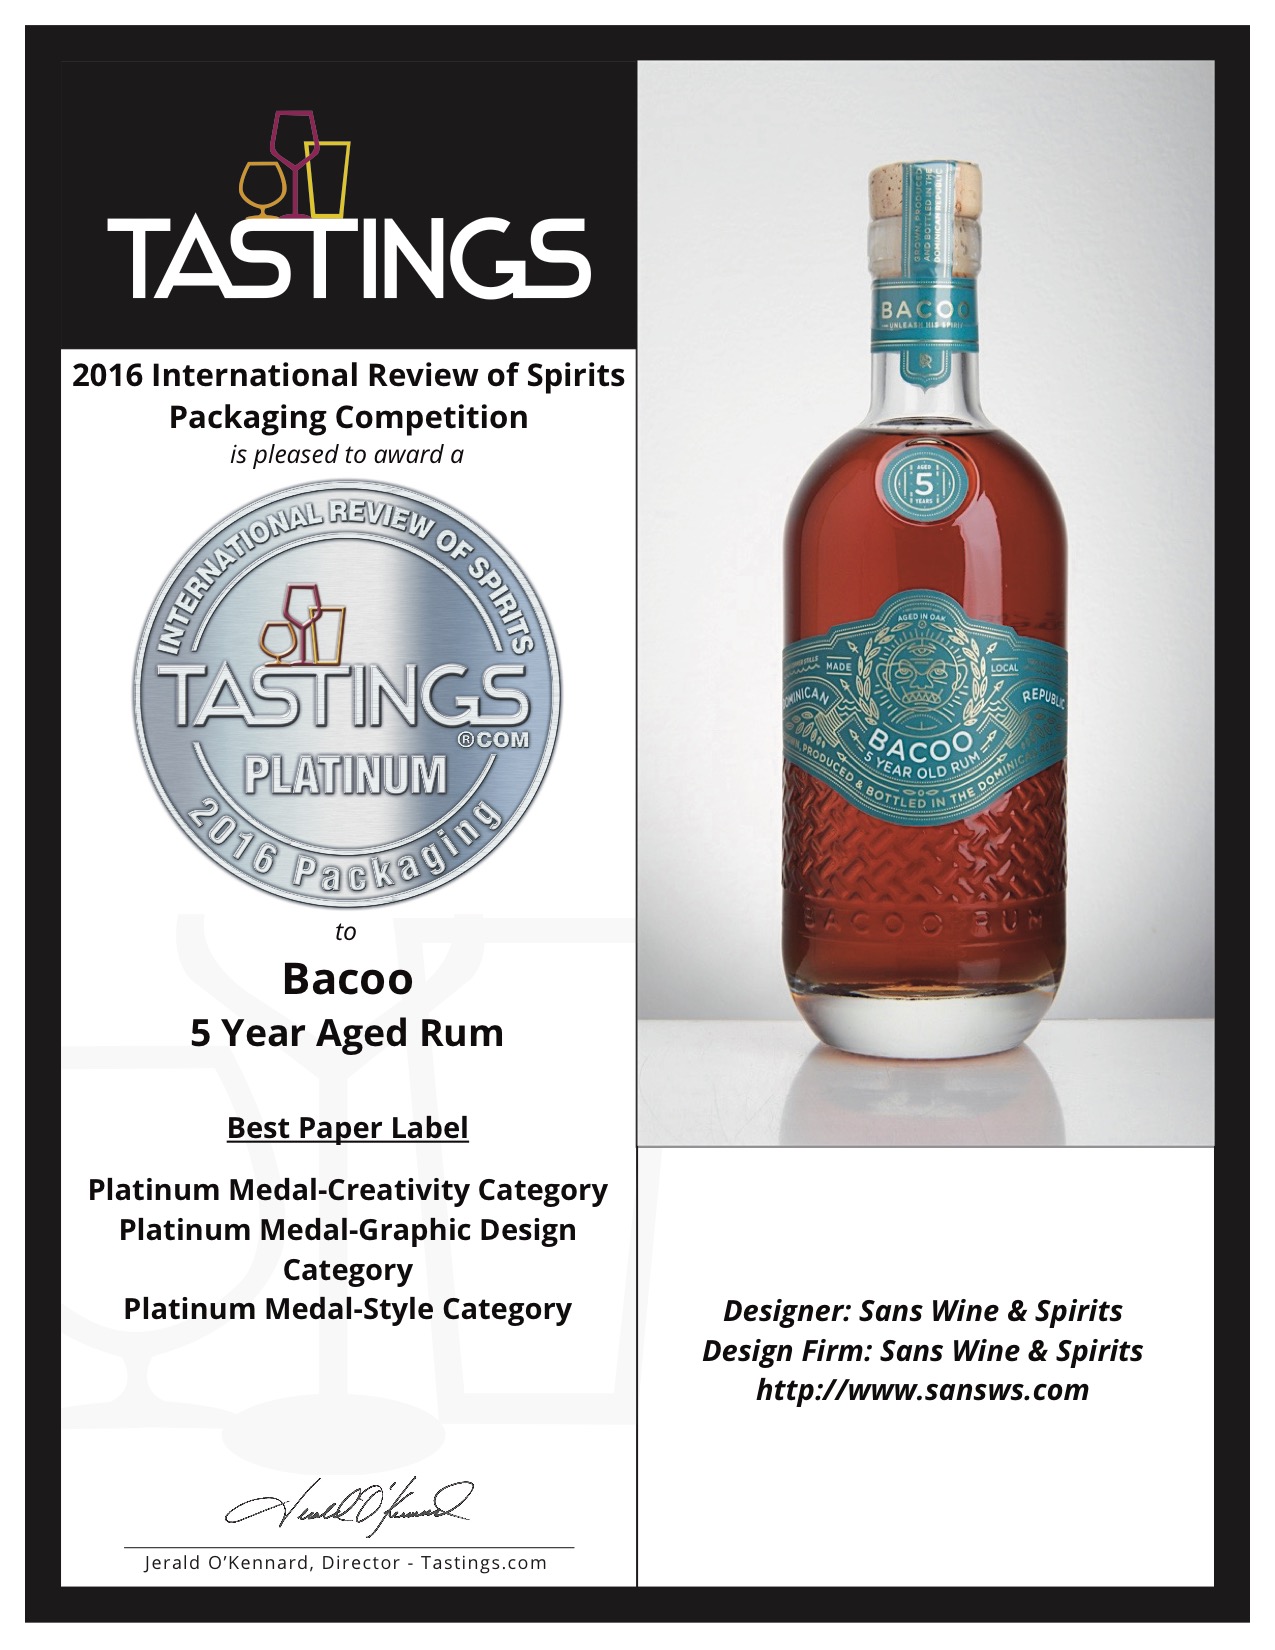 Bacco 5 Year Aged Rum's paper label won a Platinum medal in Tastings.com's 2016 International Review of Spirits Packaging Competition